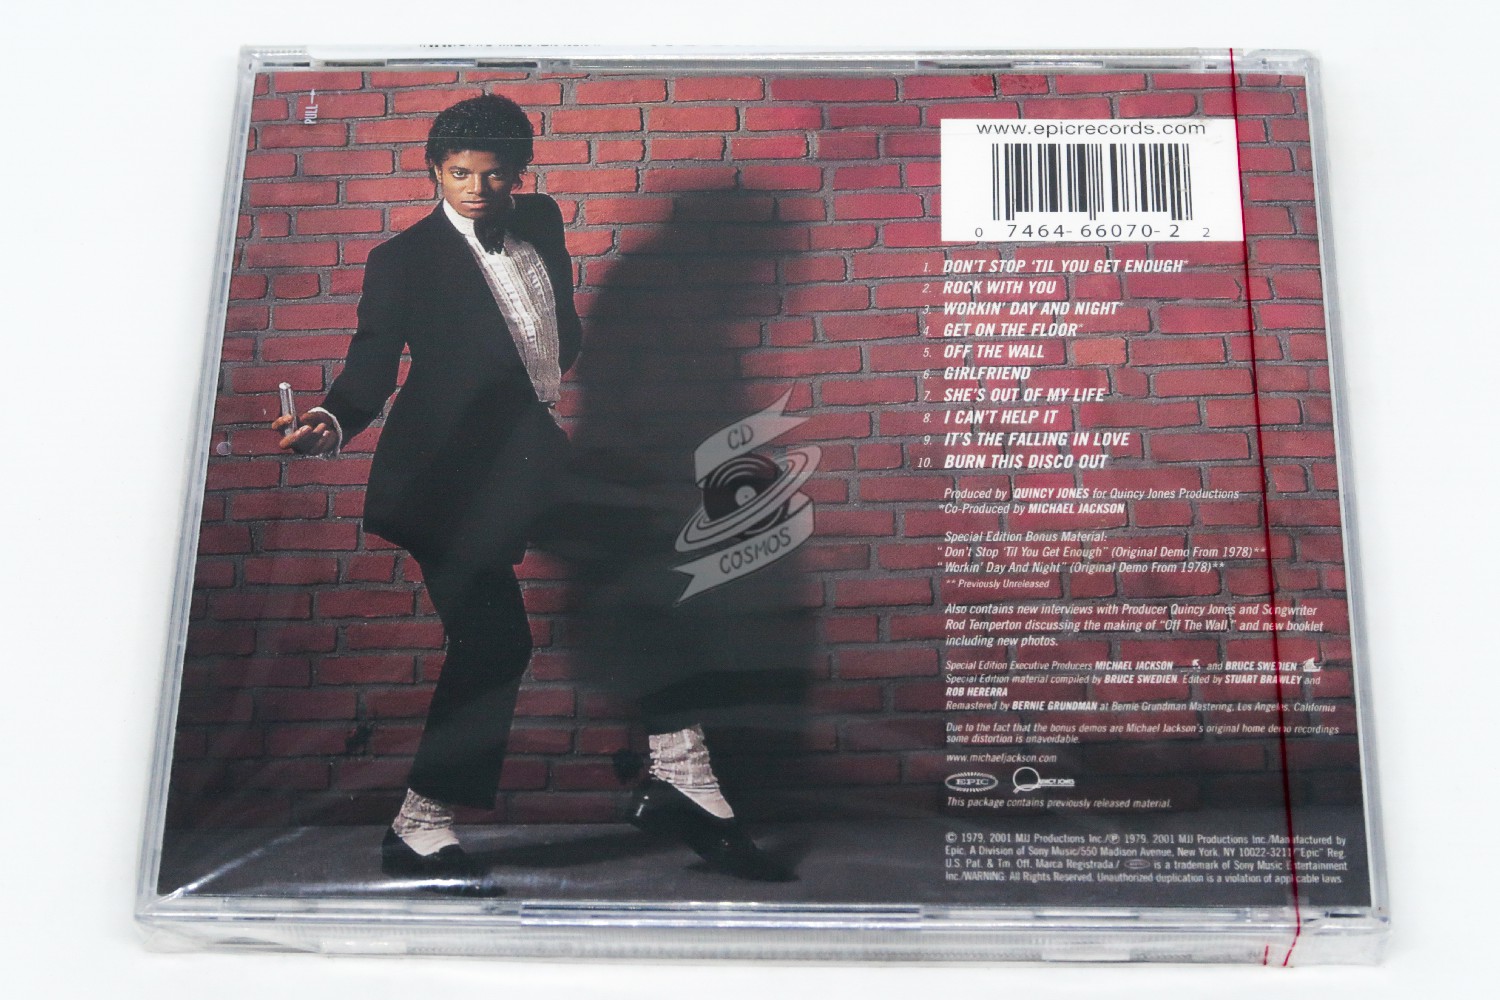 New Michael Jackson album to be released this fall